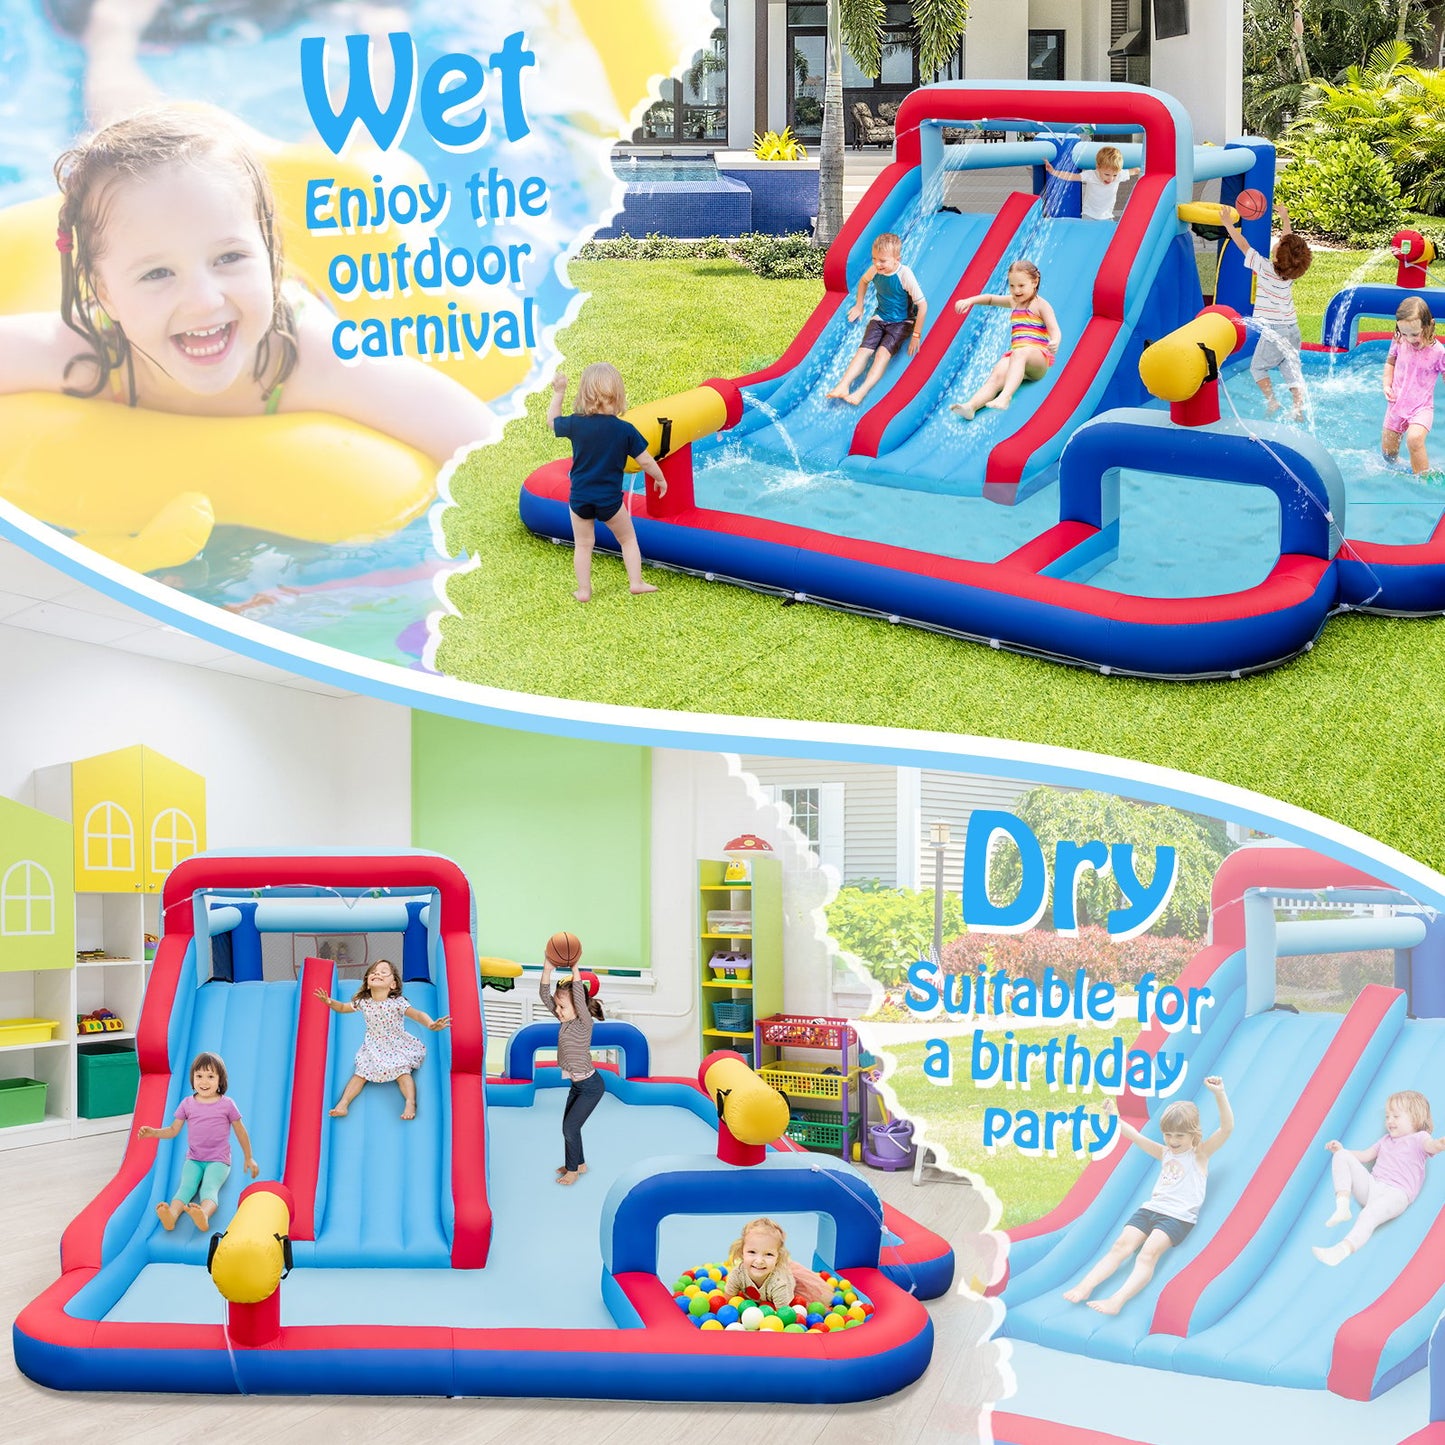 Inflatable Bounce House with 2 Water Slides and 3 Water Cannons With 735W Blower, Blue